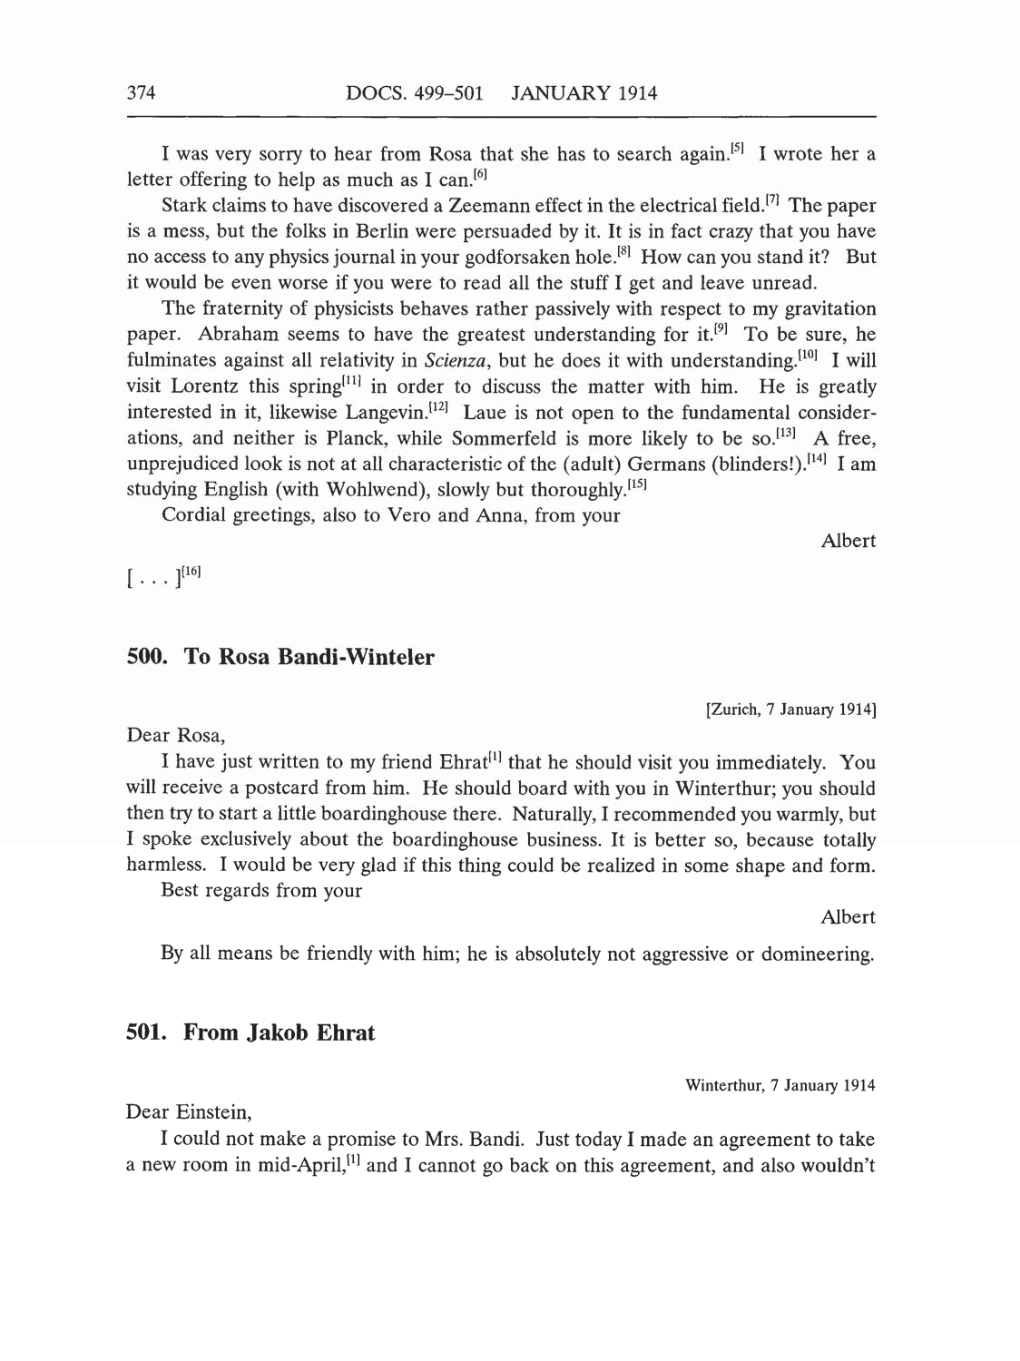 Volume 5: The Swiss Years: Correspondence, 1902-1914 (English translation supplement) page 374